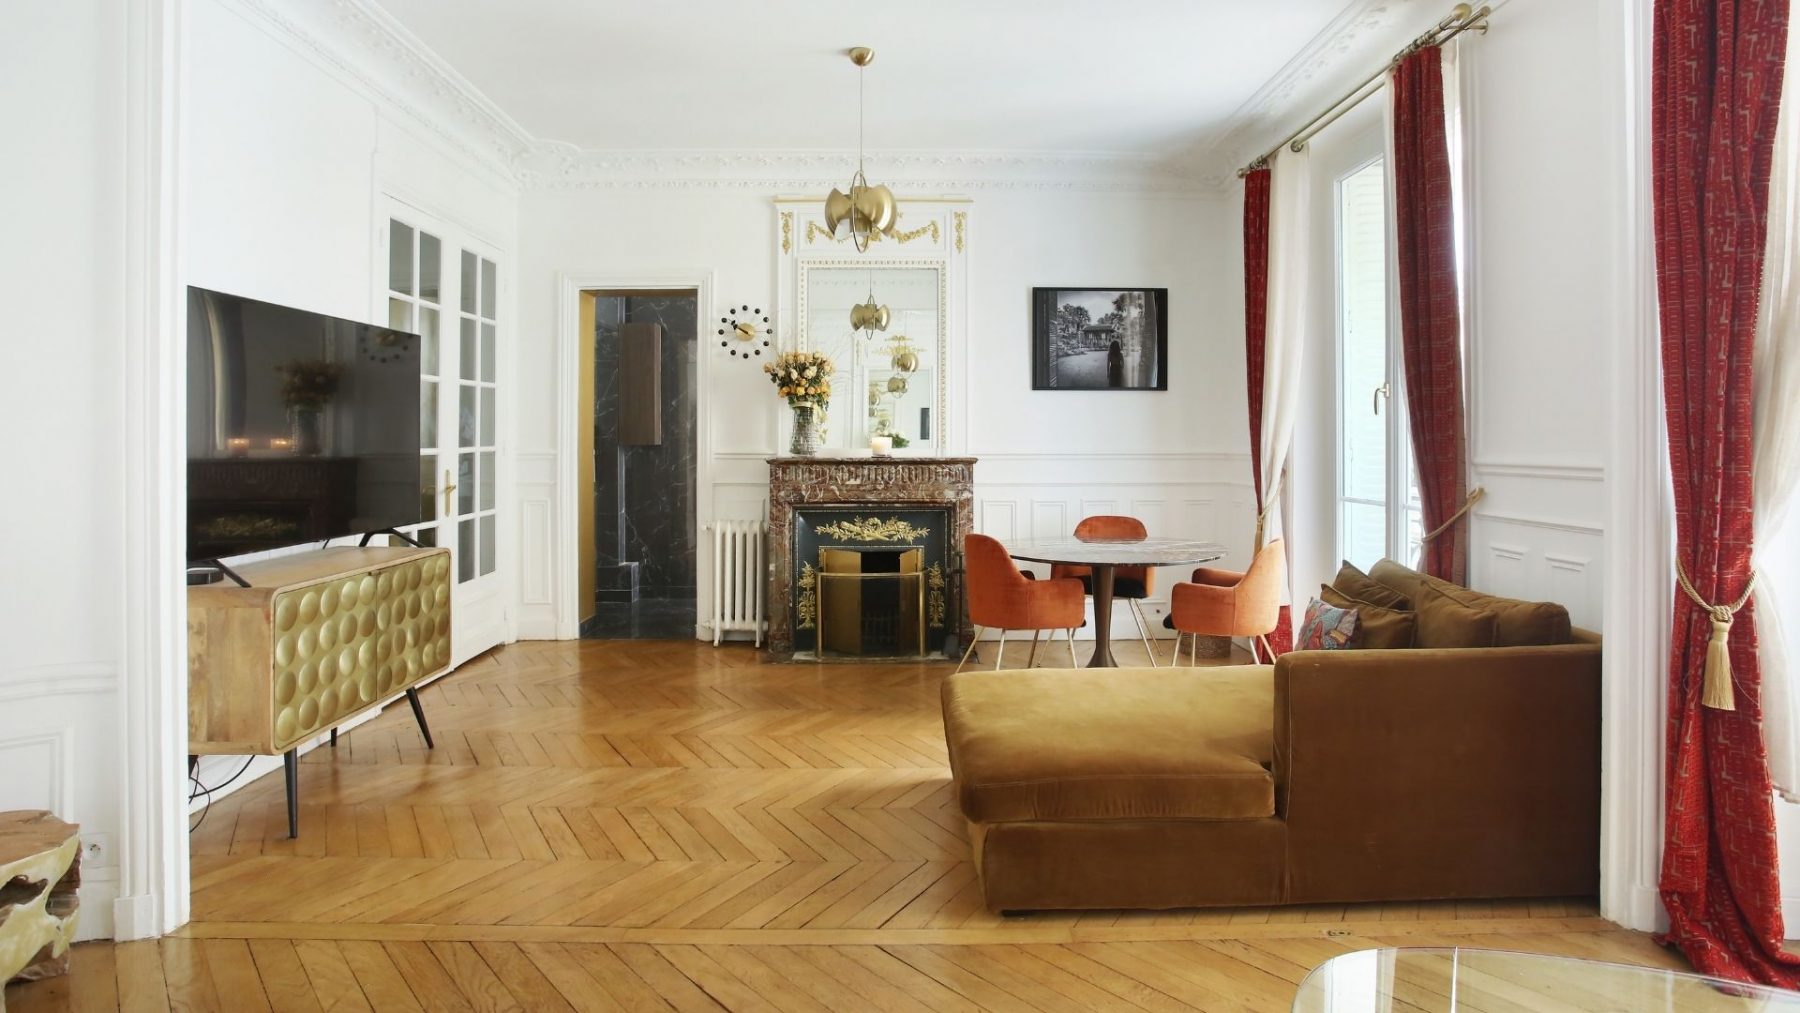 MR Agency Real Estate, apartment Paris 8 to sell